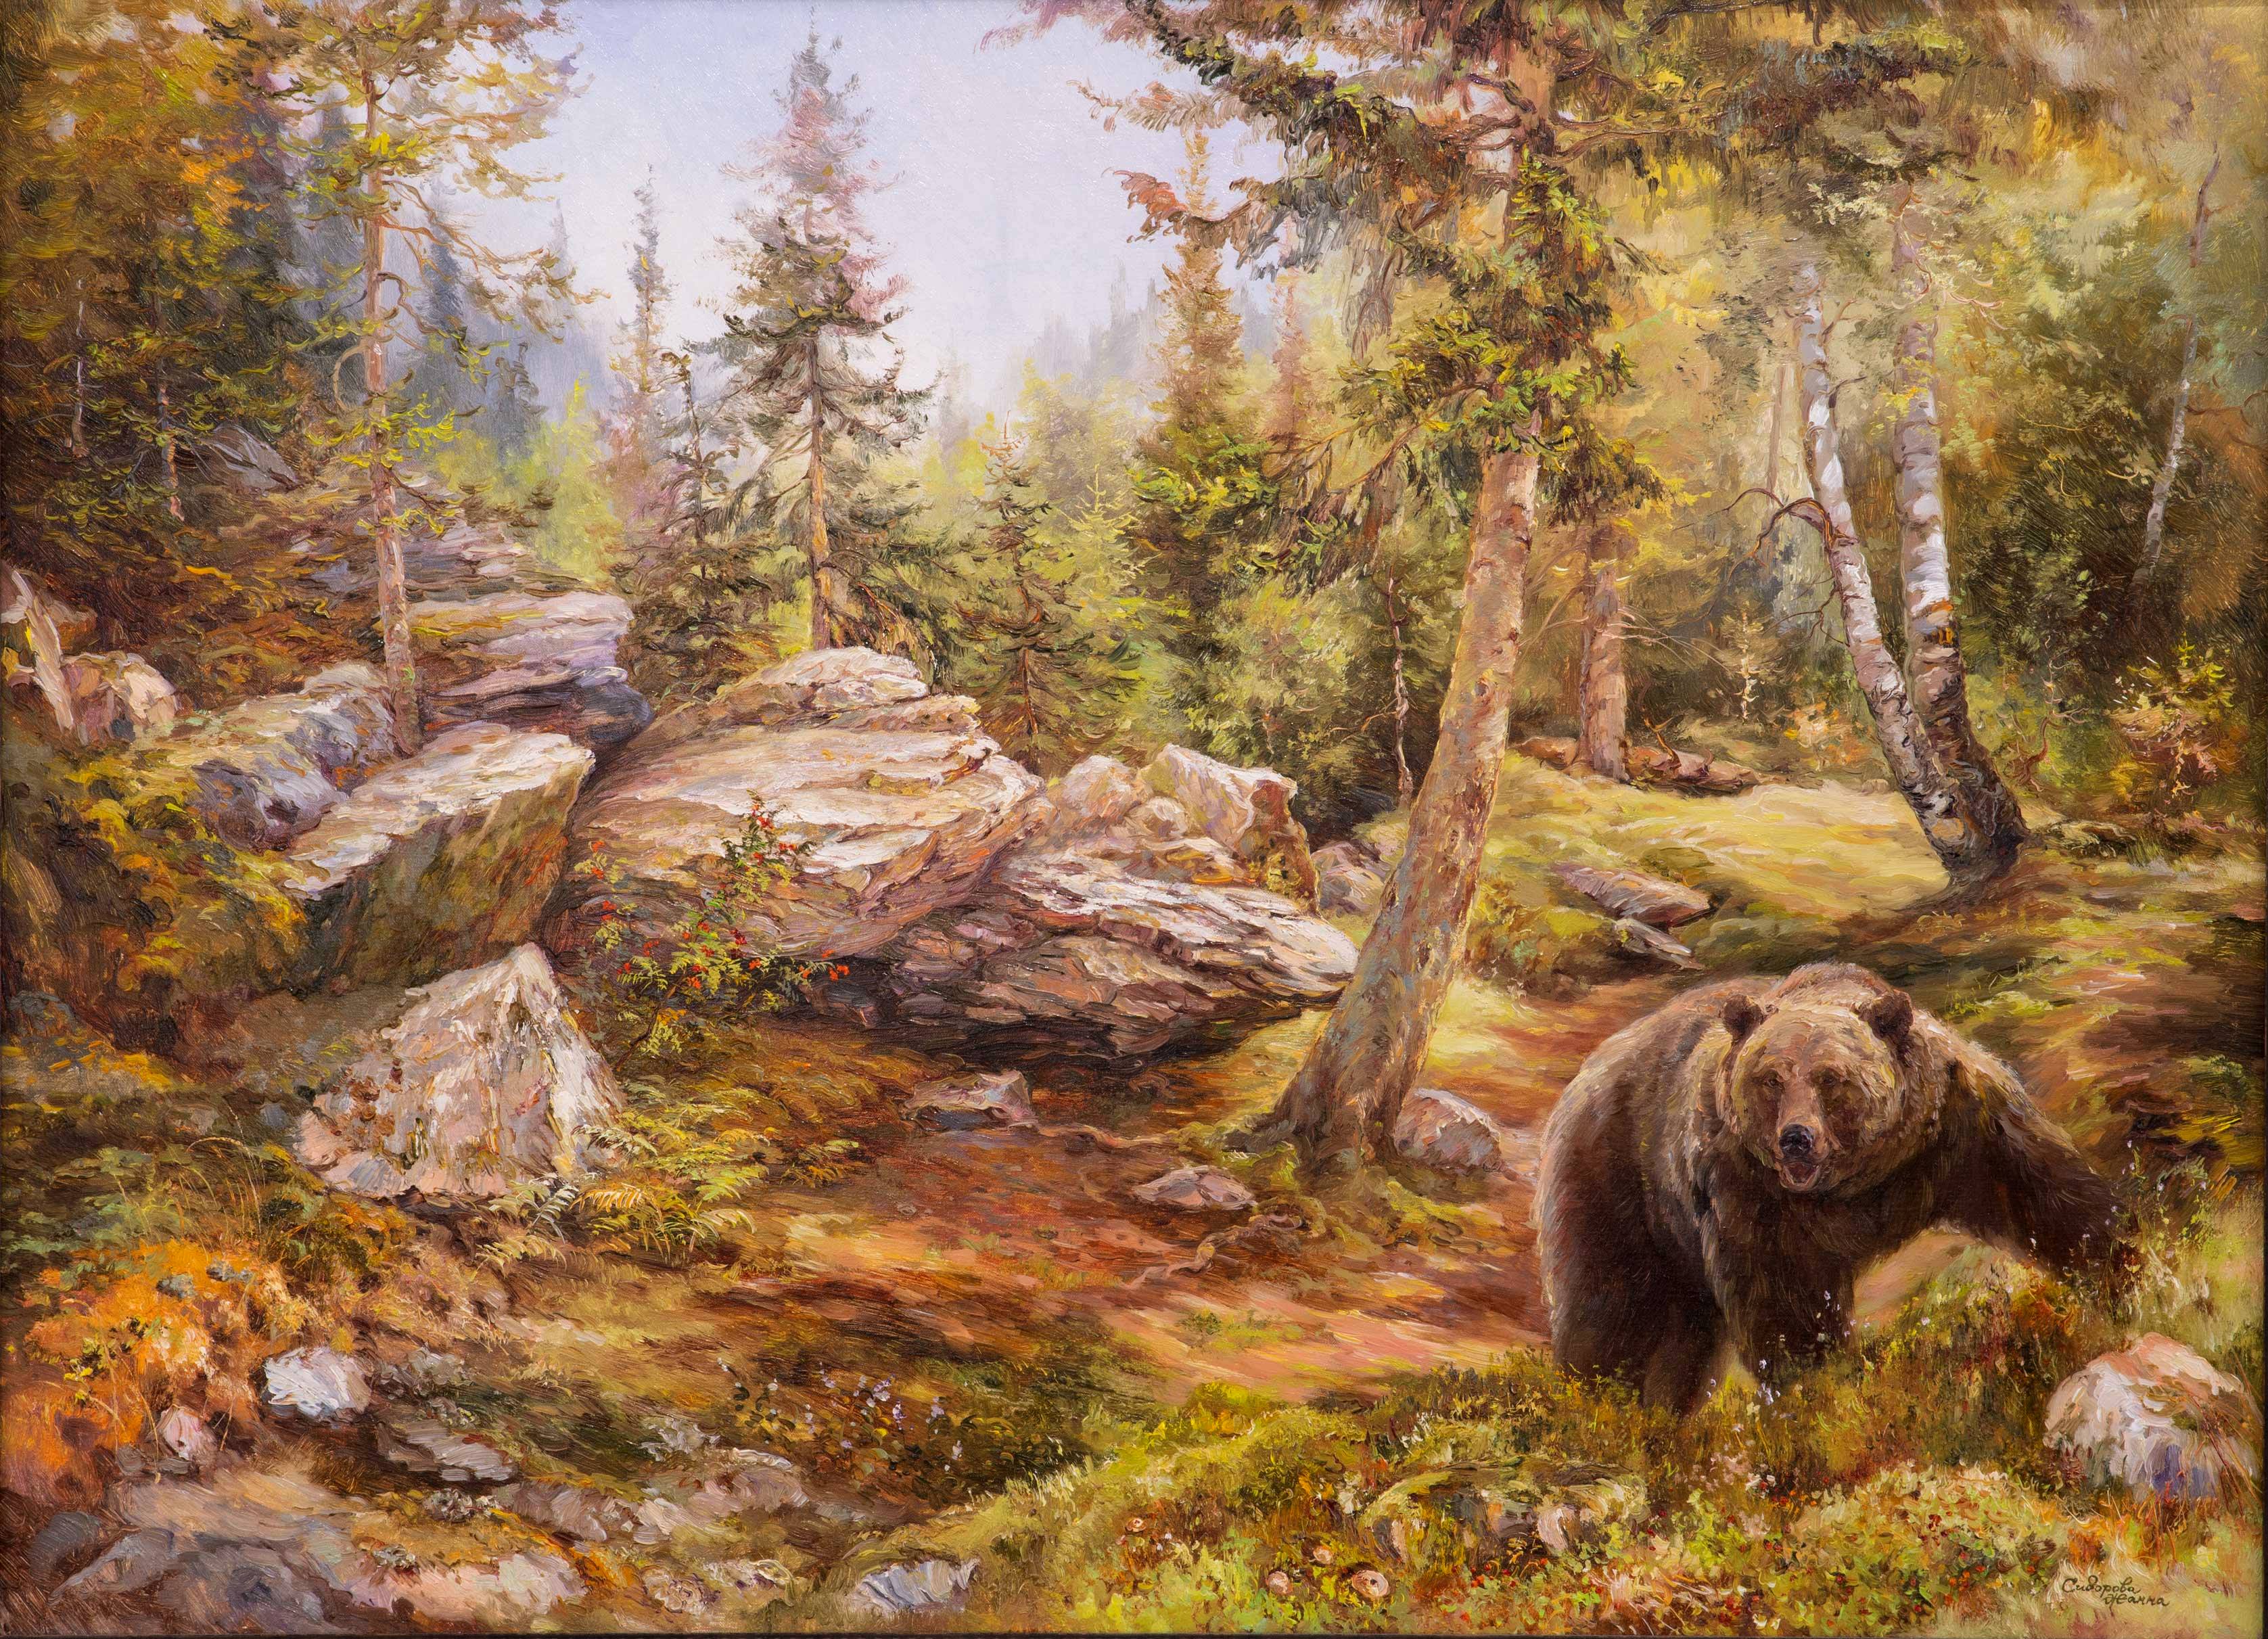 Brown Bear Is Watching His Possessions - 1, Zhanna Sidorova, Buy the painting Oil